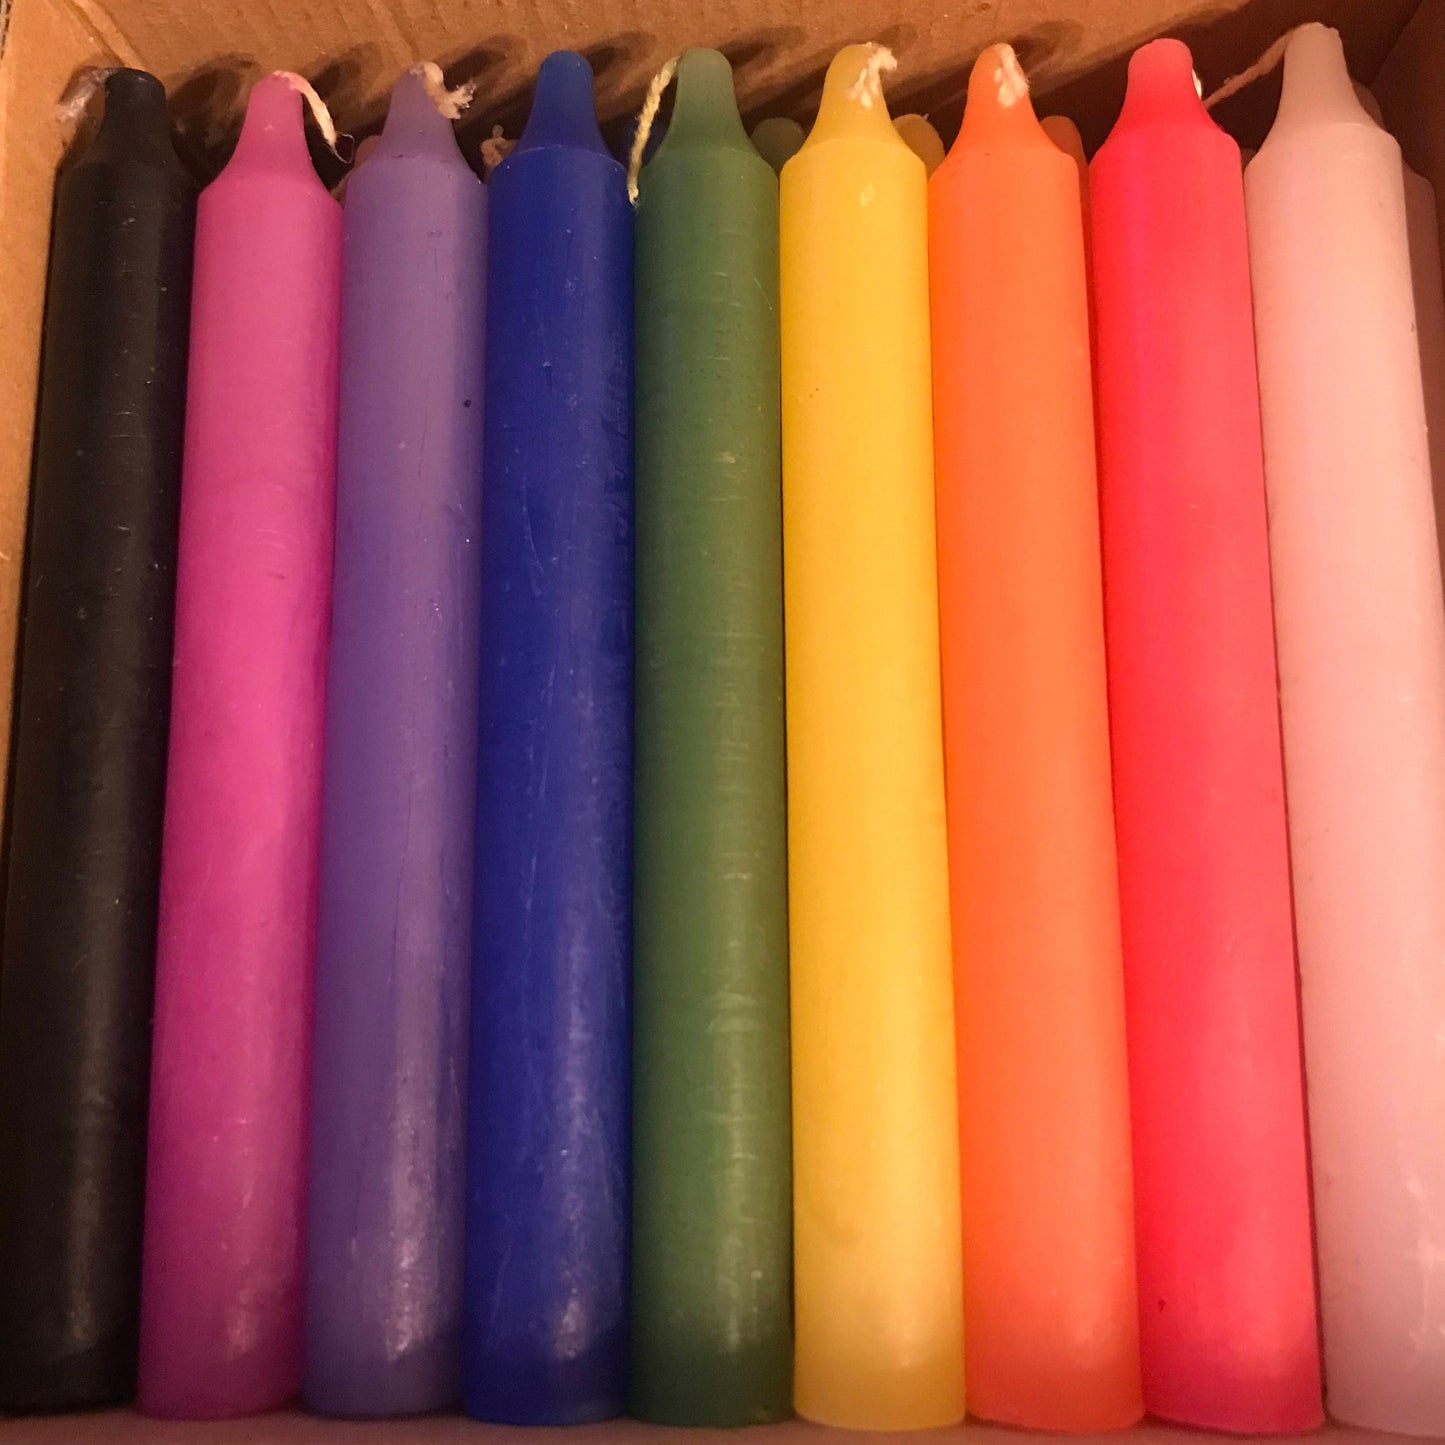 6" Altar Candle